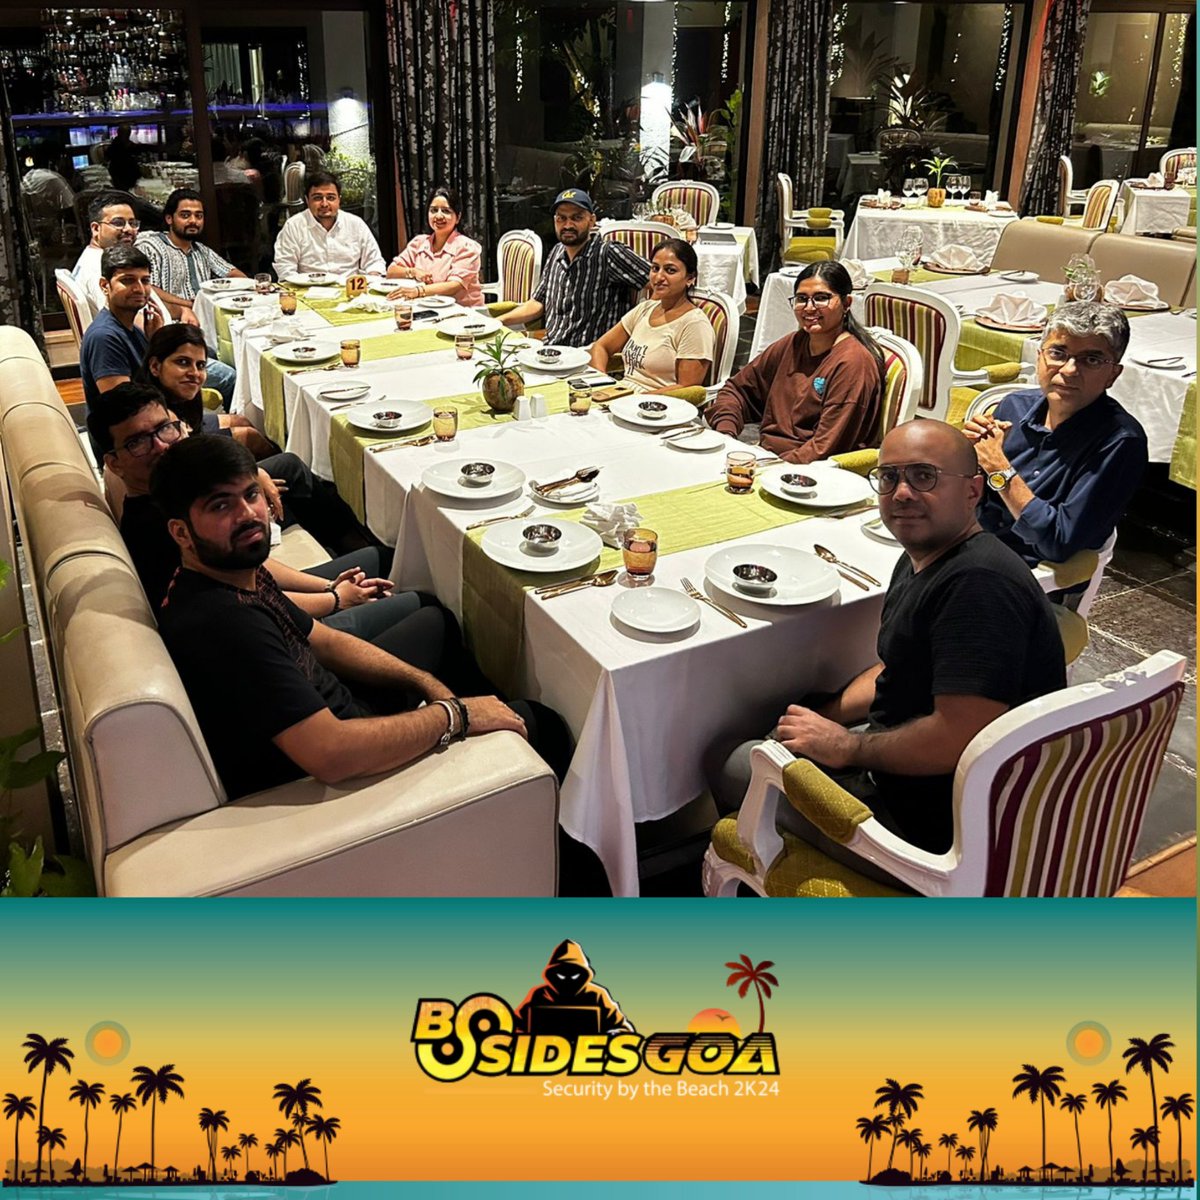 🌟 The BSidesGoa team is all set and assembled at Planet Hollywood Resort, eagerly awaiting to host you all! 🎉 Get ready for an unforgettable experience filled with cybersecurity insights, networking opportunities, and enriching discussions. See you soon! 🚀🔒 

Our Team :-